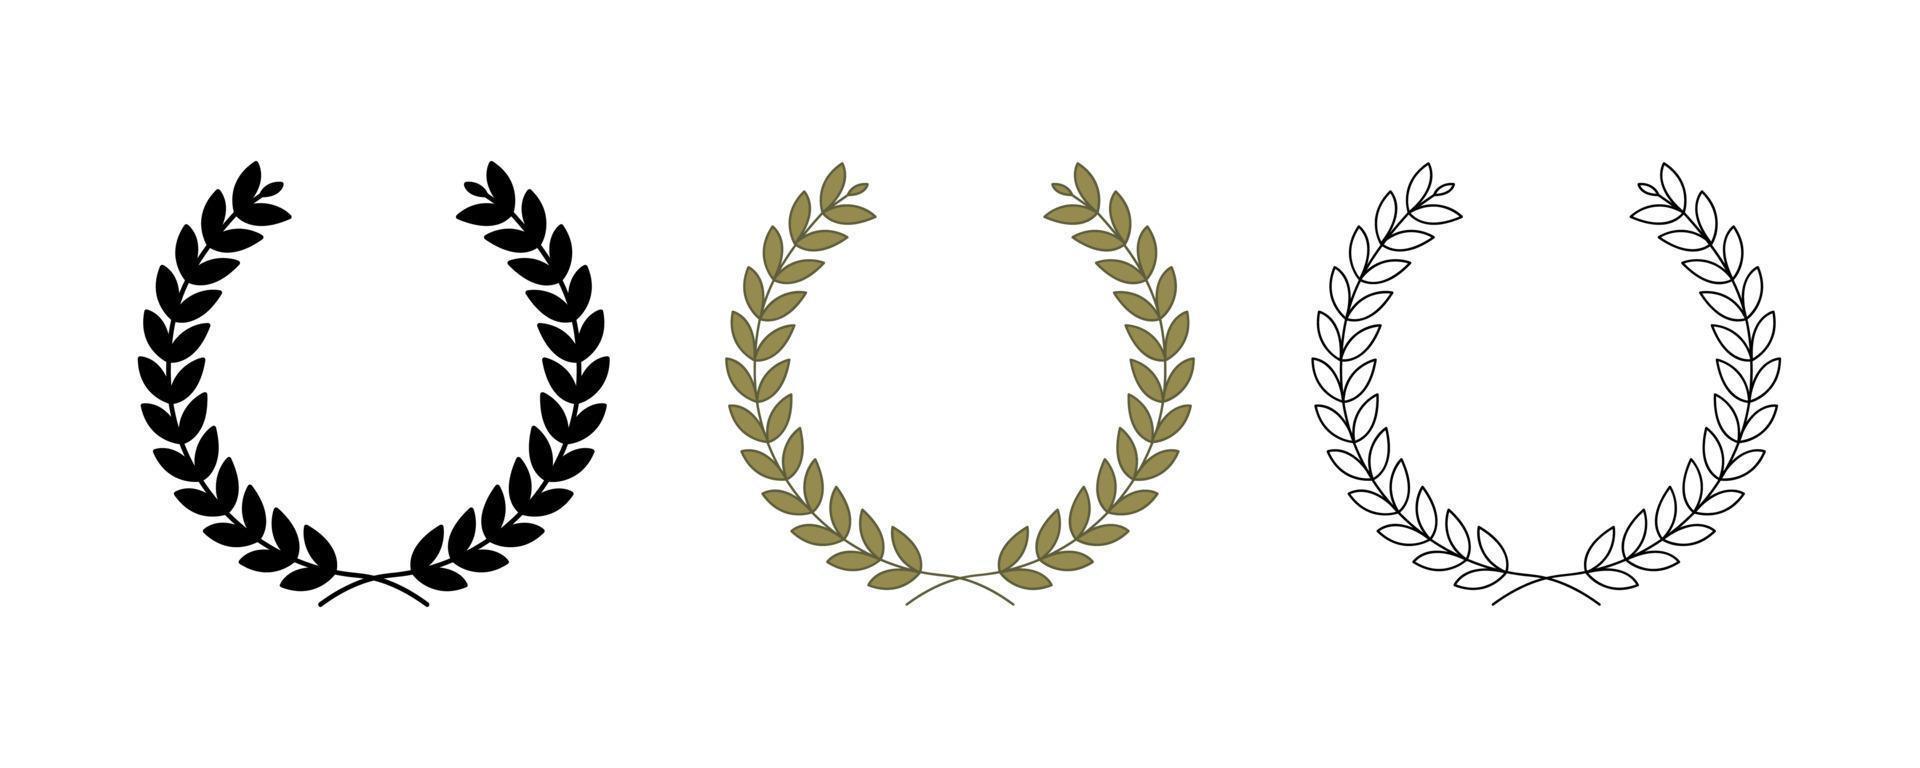 Green background, silhouette, circular bay leaf and a trophy, heraldry wreath. Collection of wreaths depicting success, victory, crown, winner, ornate, vector icon illustration.